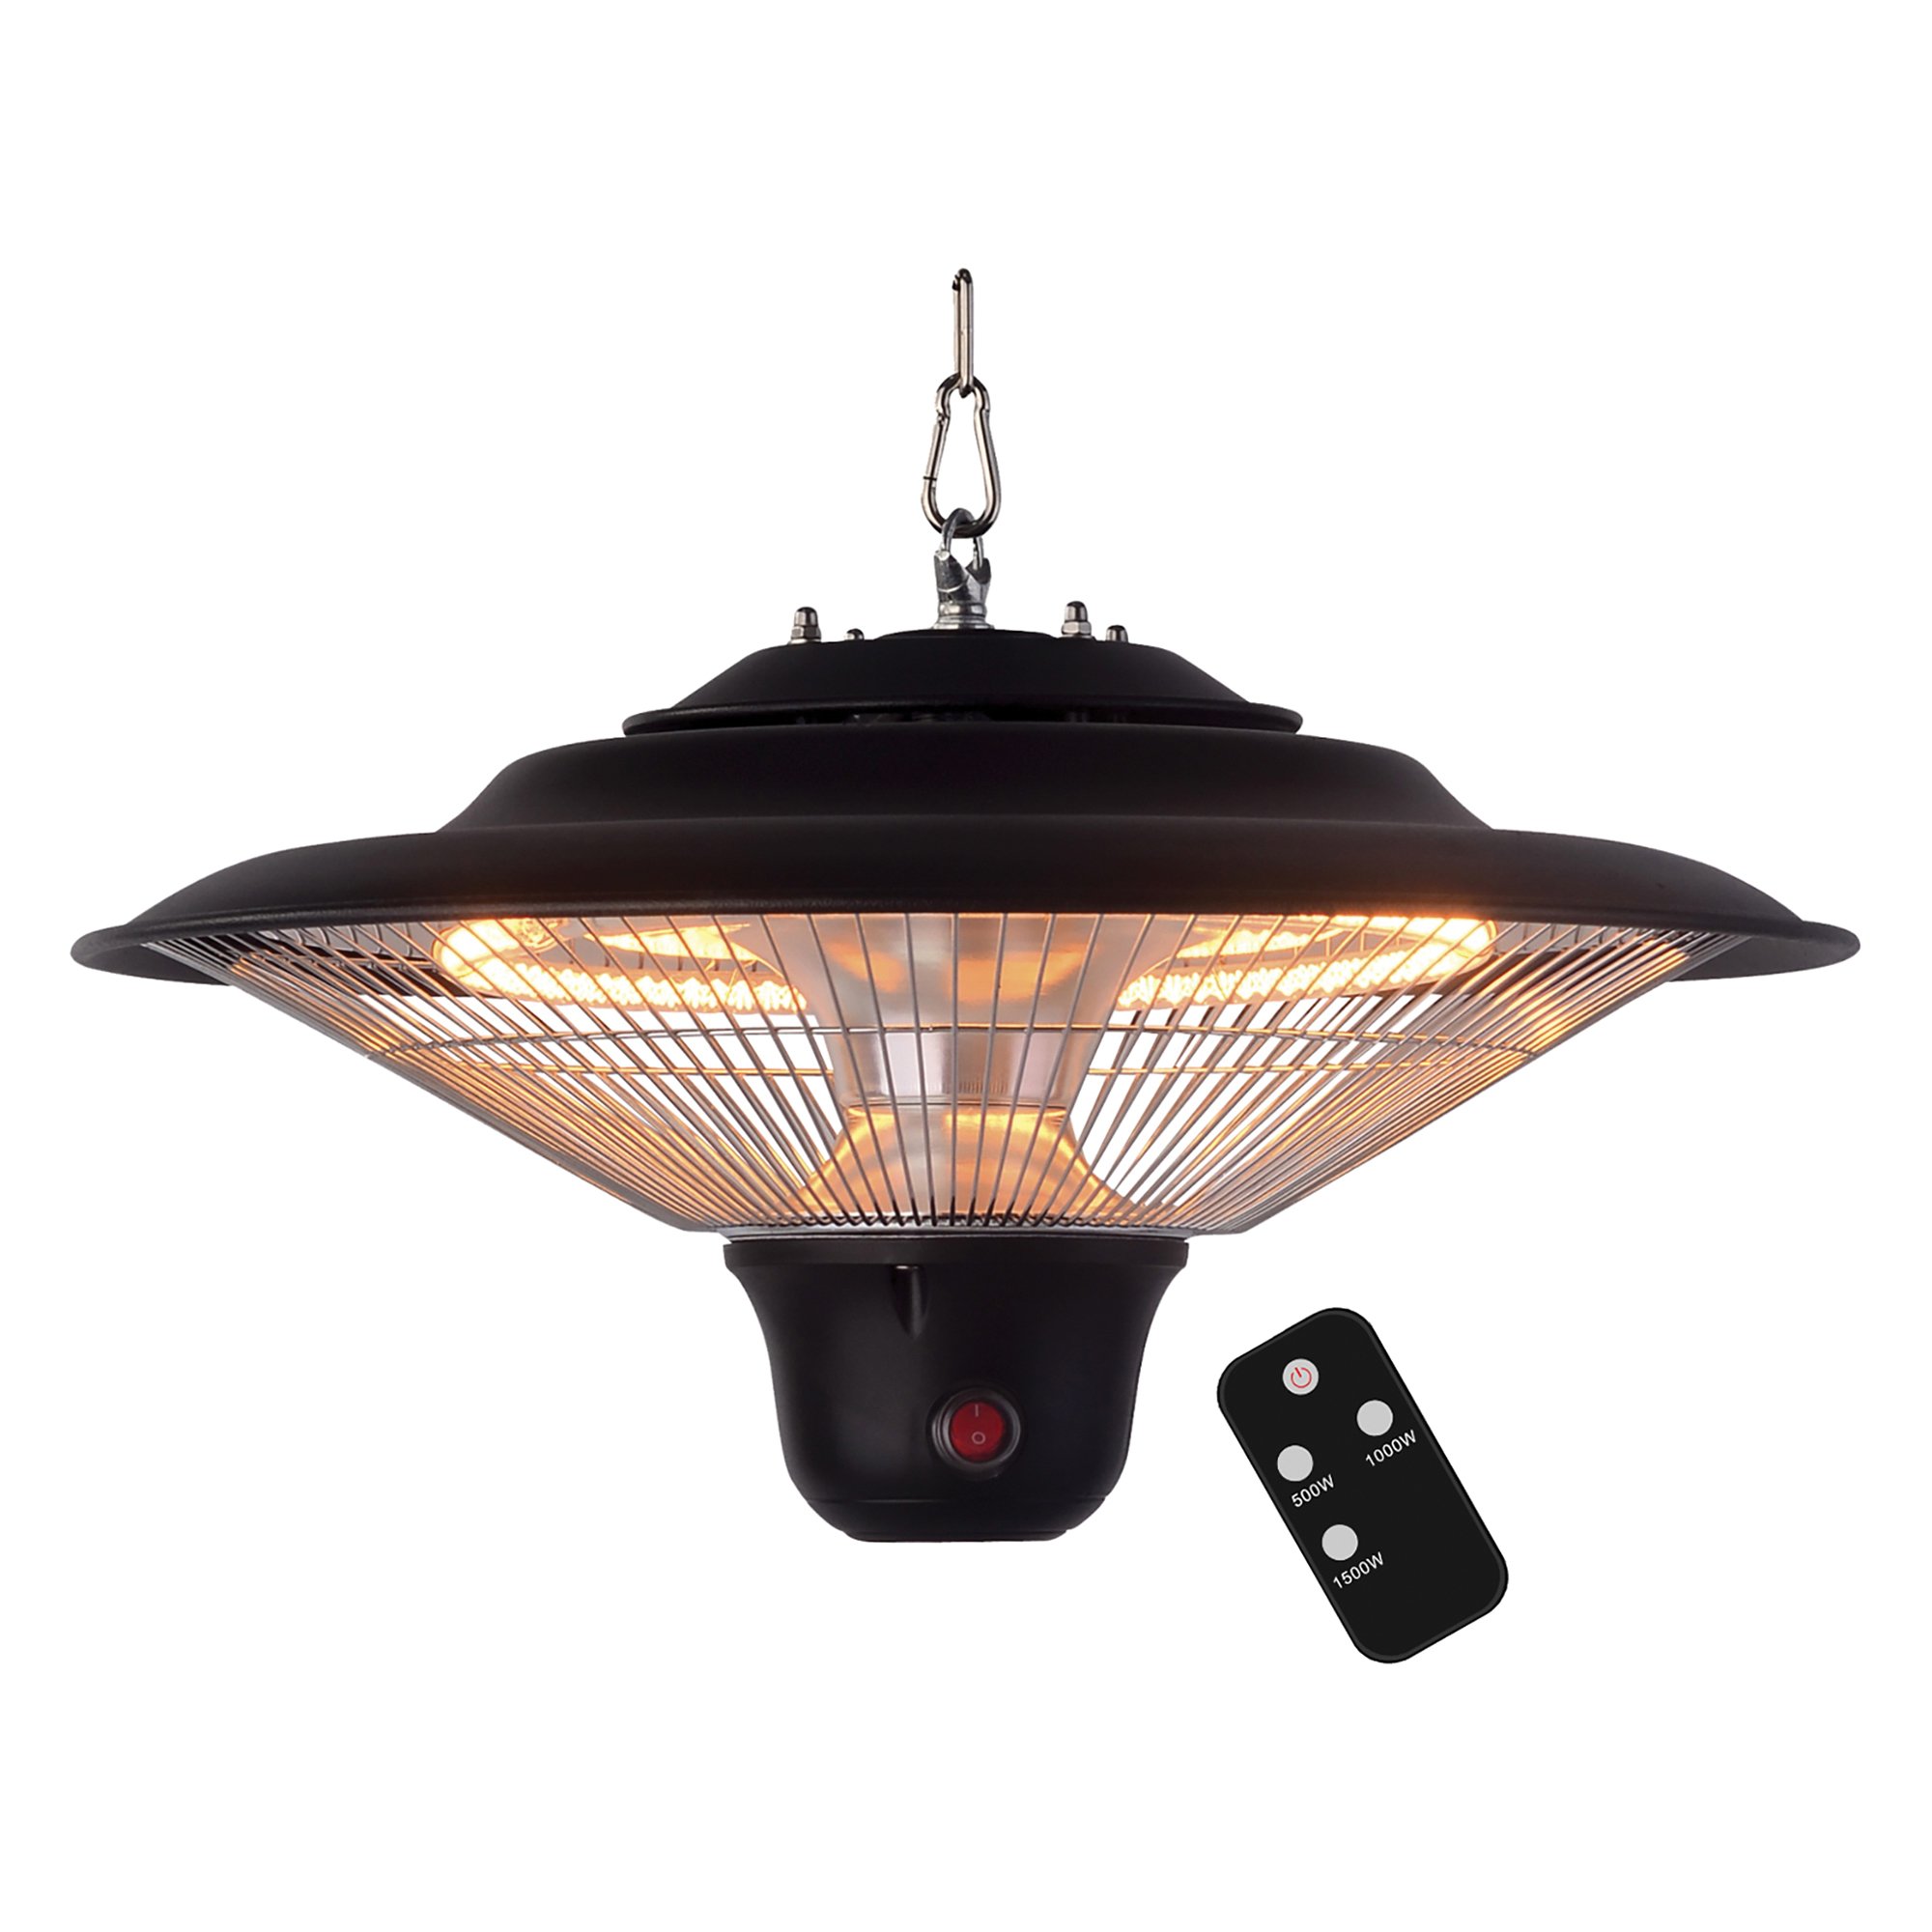 OPTIMUS PHE-1300BR PHP-1500BR 3-Setting 1,500-Watt-Max Garage-Outdoor Hanging Infrared Halogen Heater with Remote